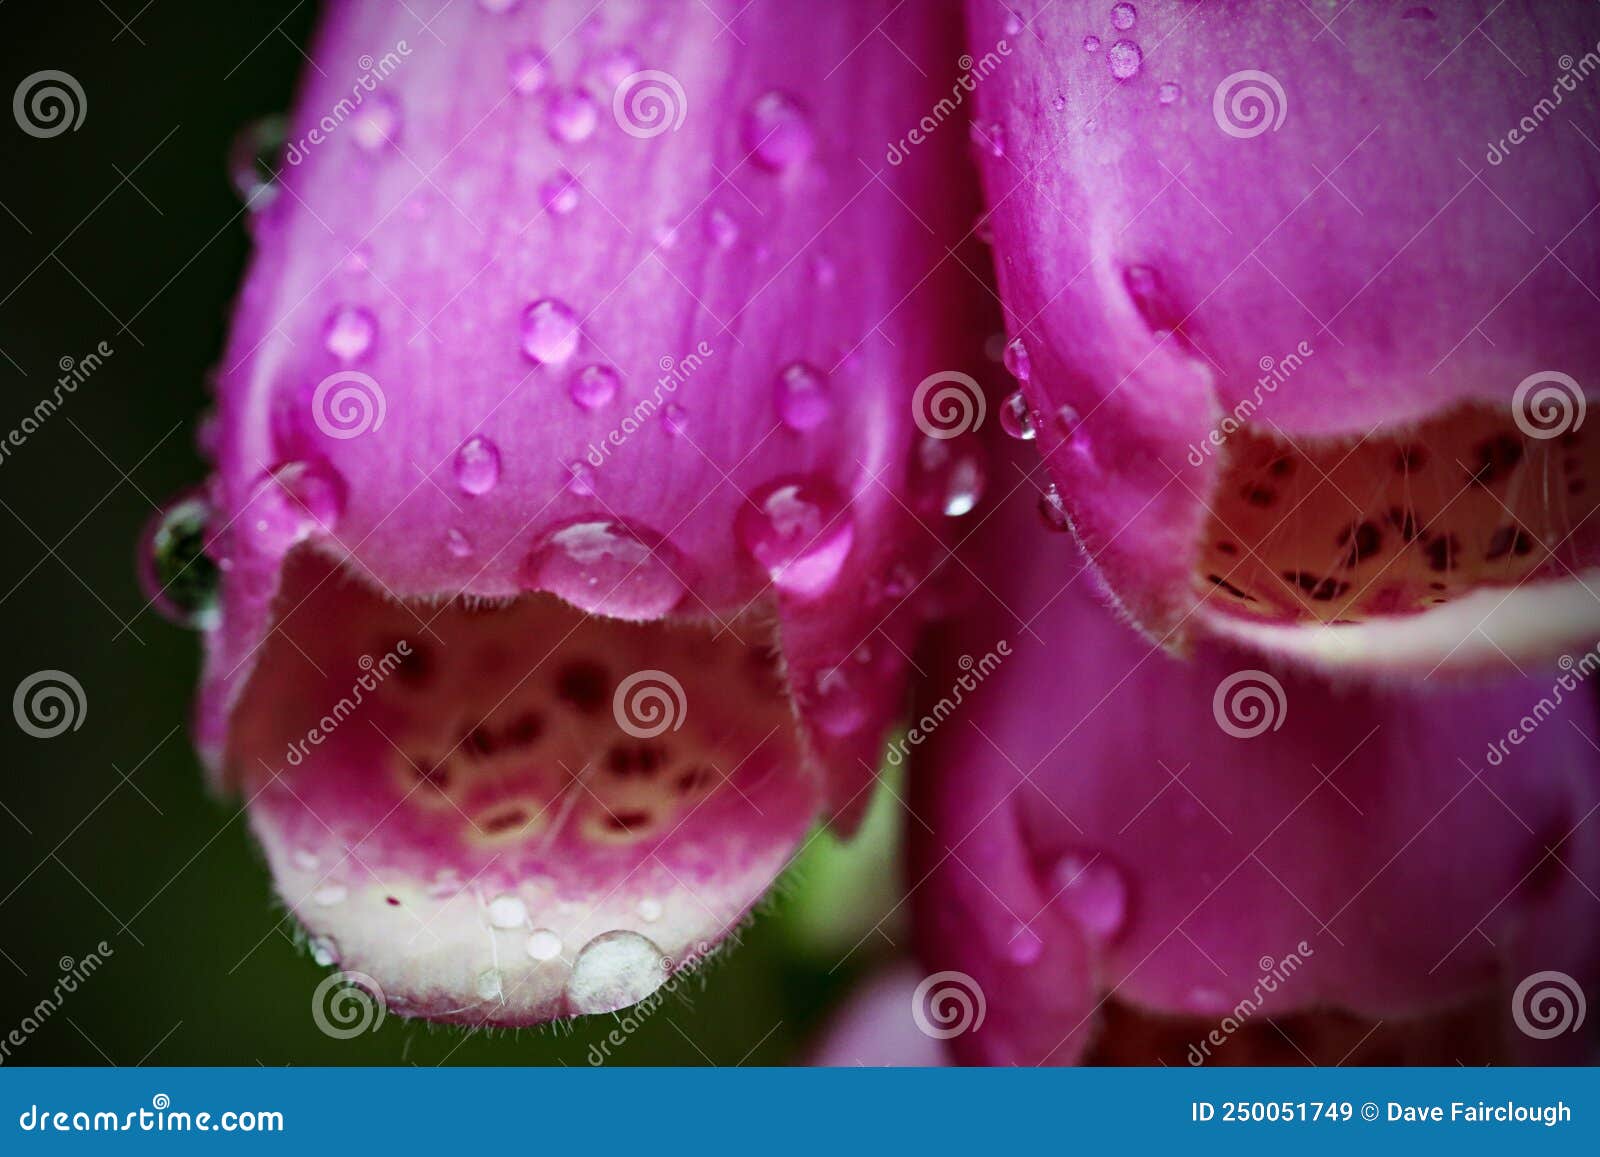 An Extreme Closeup of Pink Hollyhock Flowers after Heavy Rain Stock ...